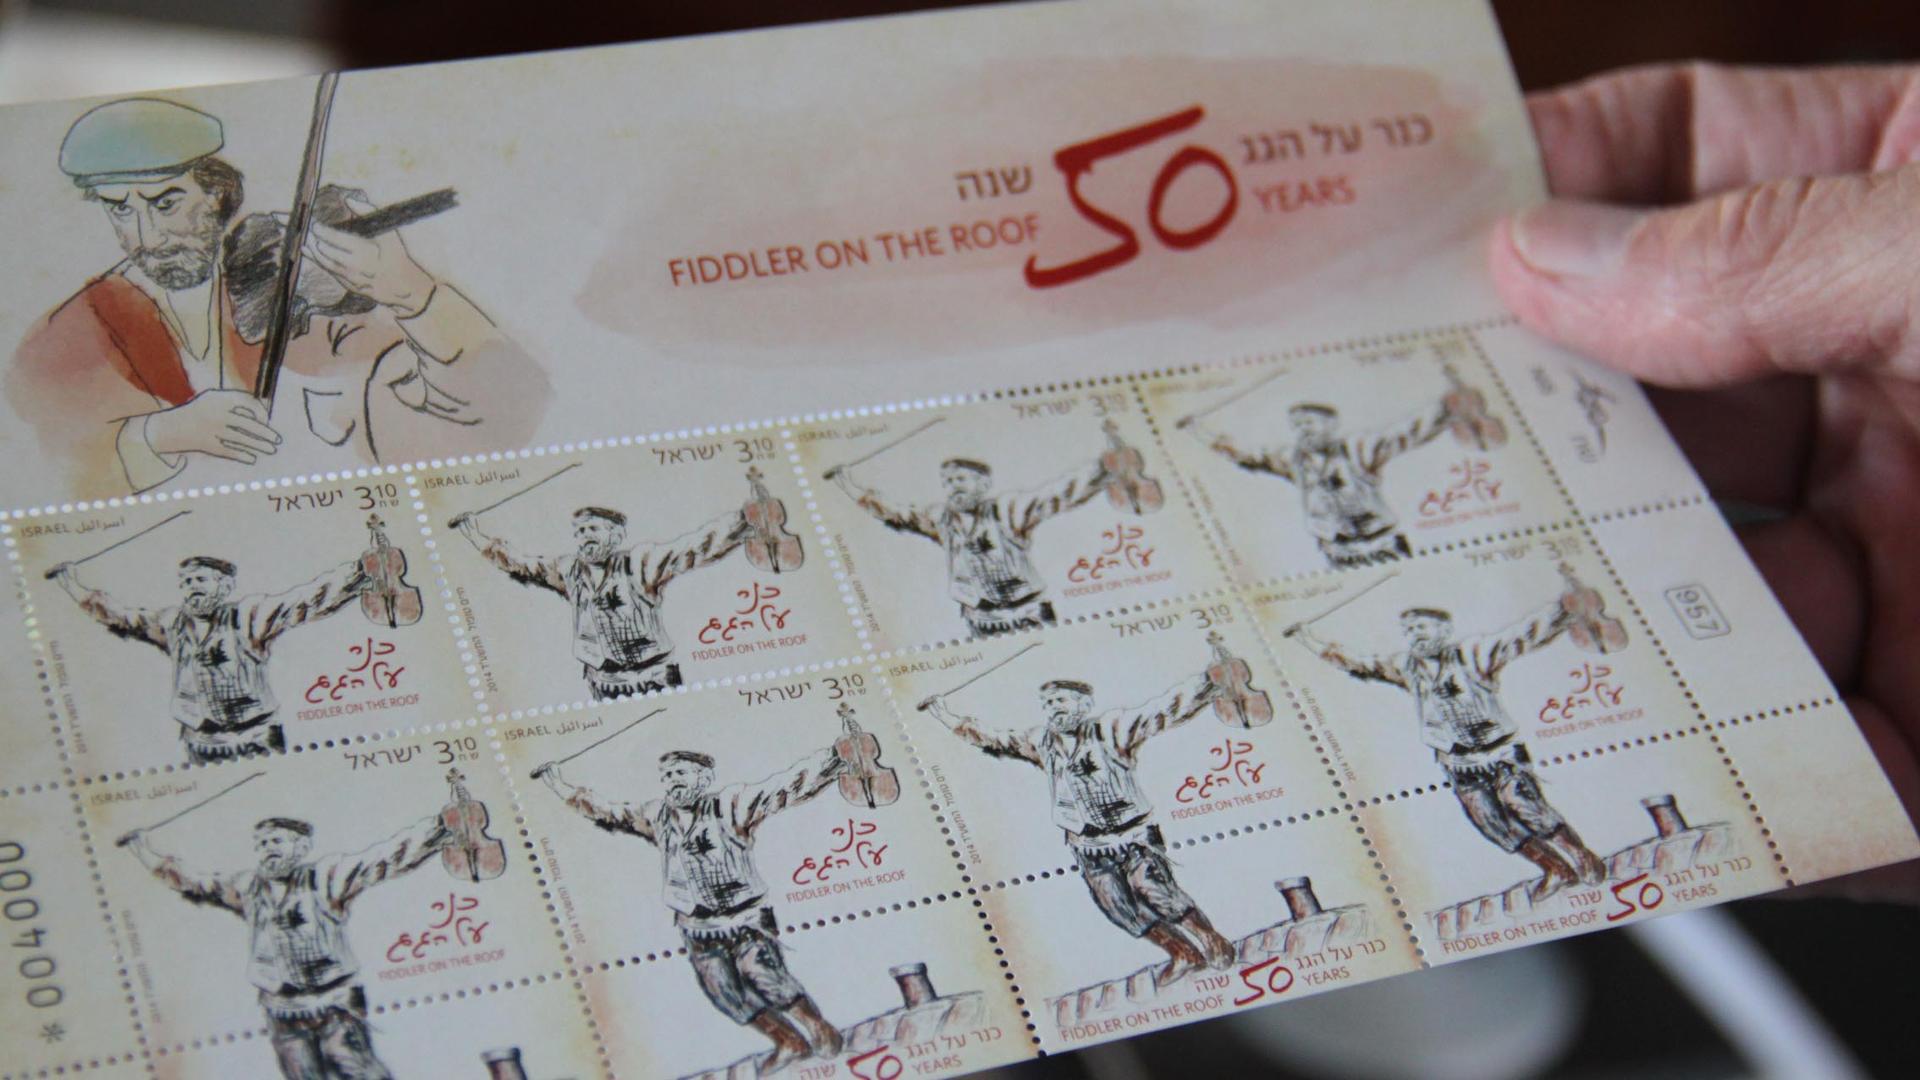 Israel issued commemorative stamps last year, featuring Topol's self-portrait as Tevye, for the 50 year anniversary of Fiddler on the Roof's debut on Broadway.